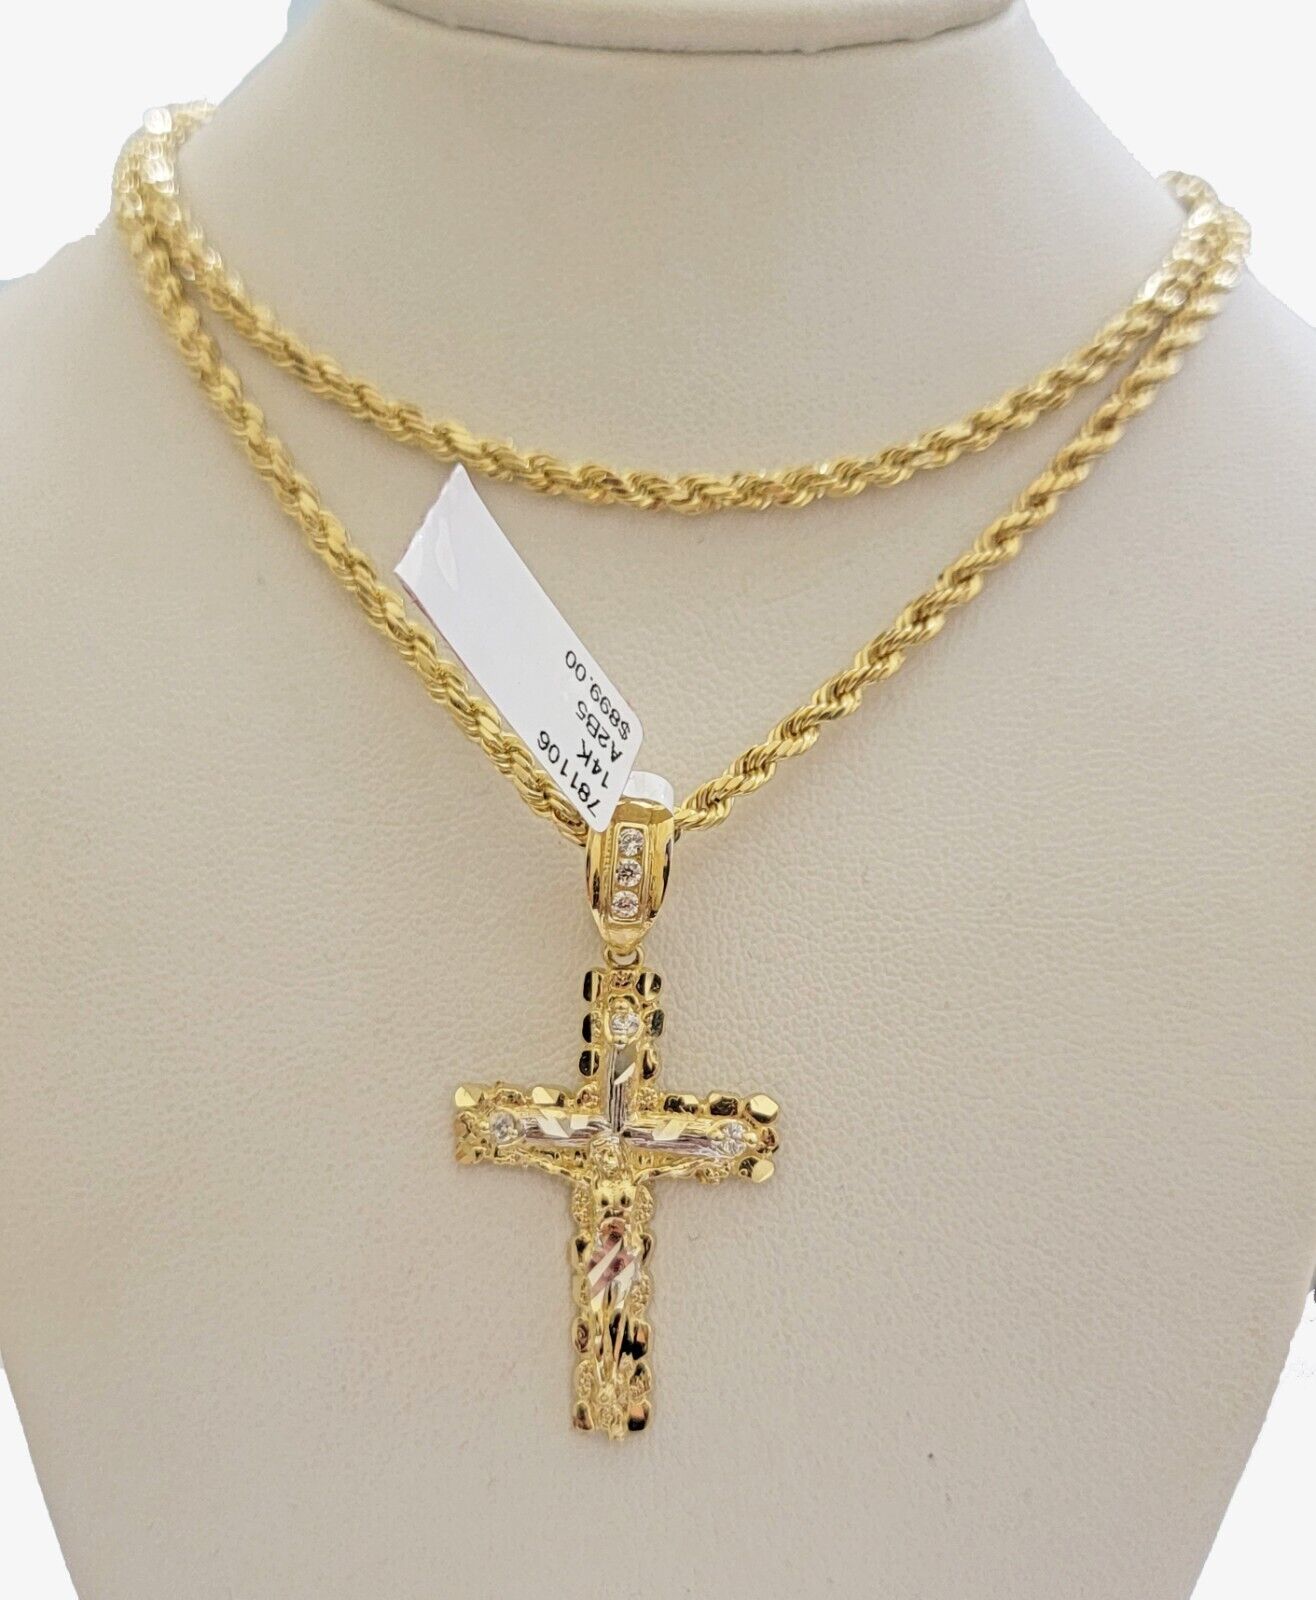 14k Gold Rope Chain Necklace Cross Charm Pendant Set 16-28